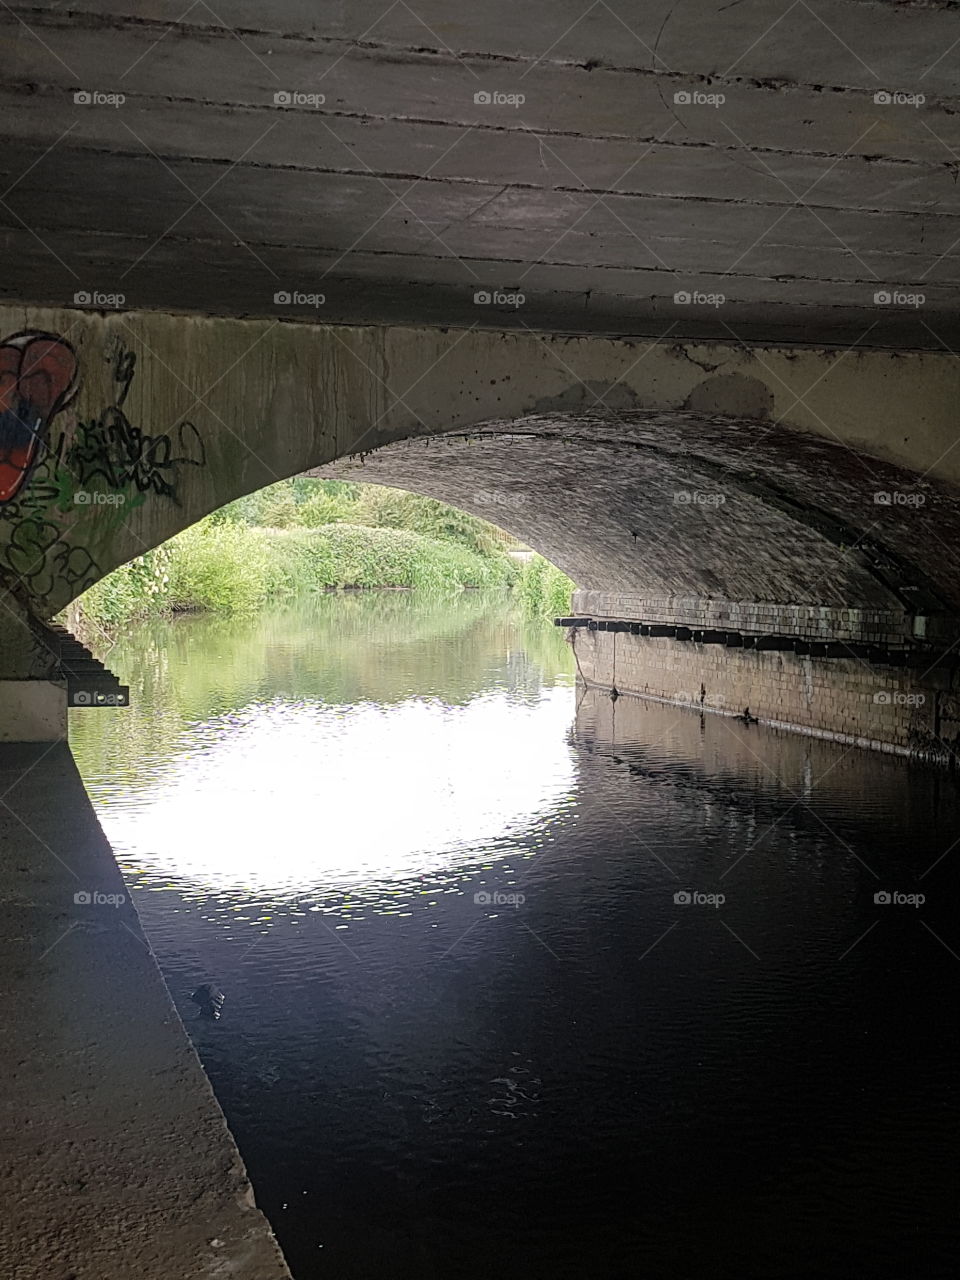 daylight under a tunnel of crystal waters